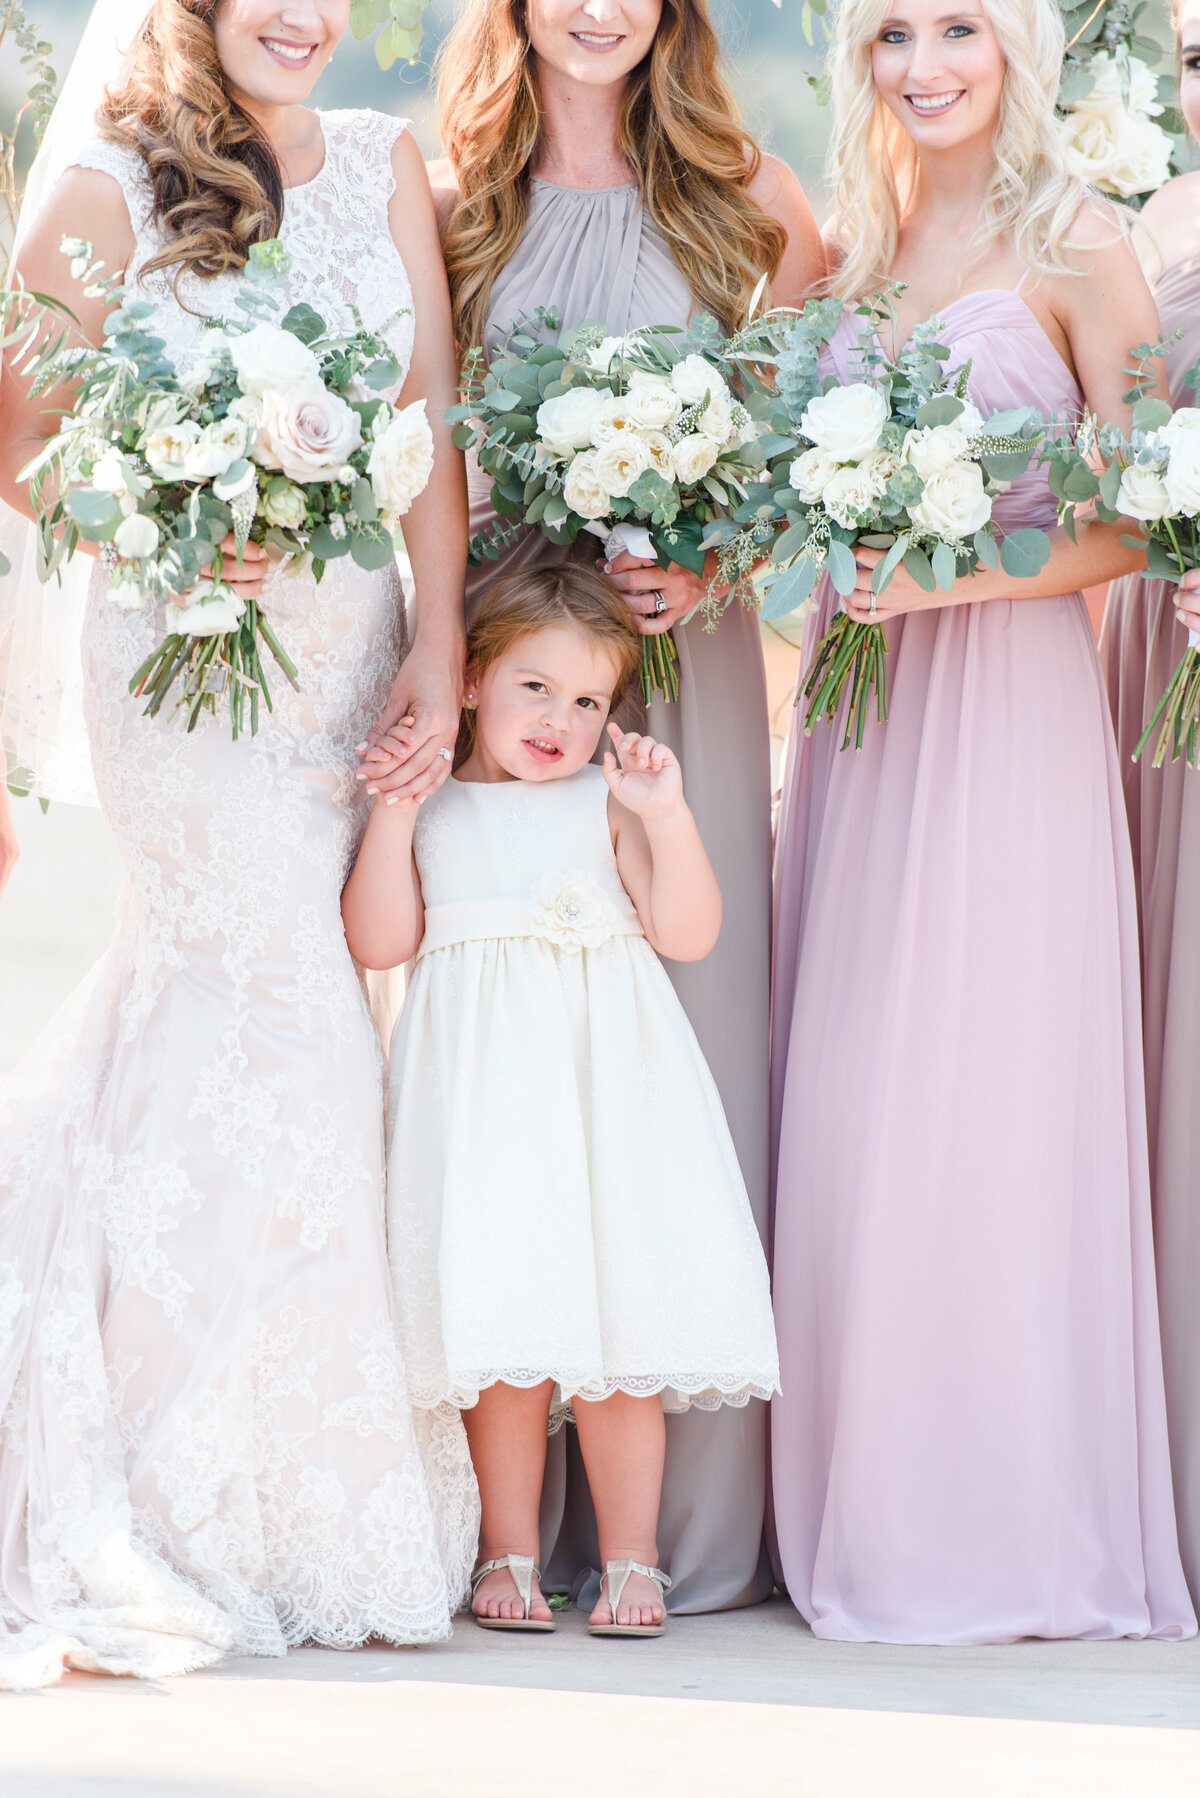 bridal party holding flower bouquet